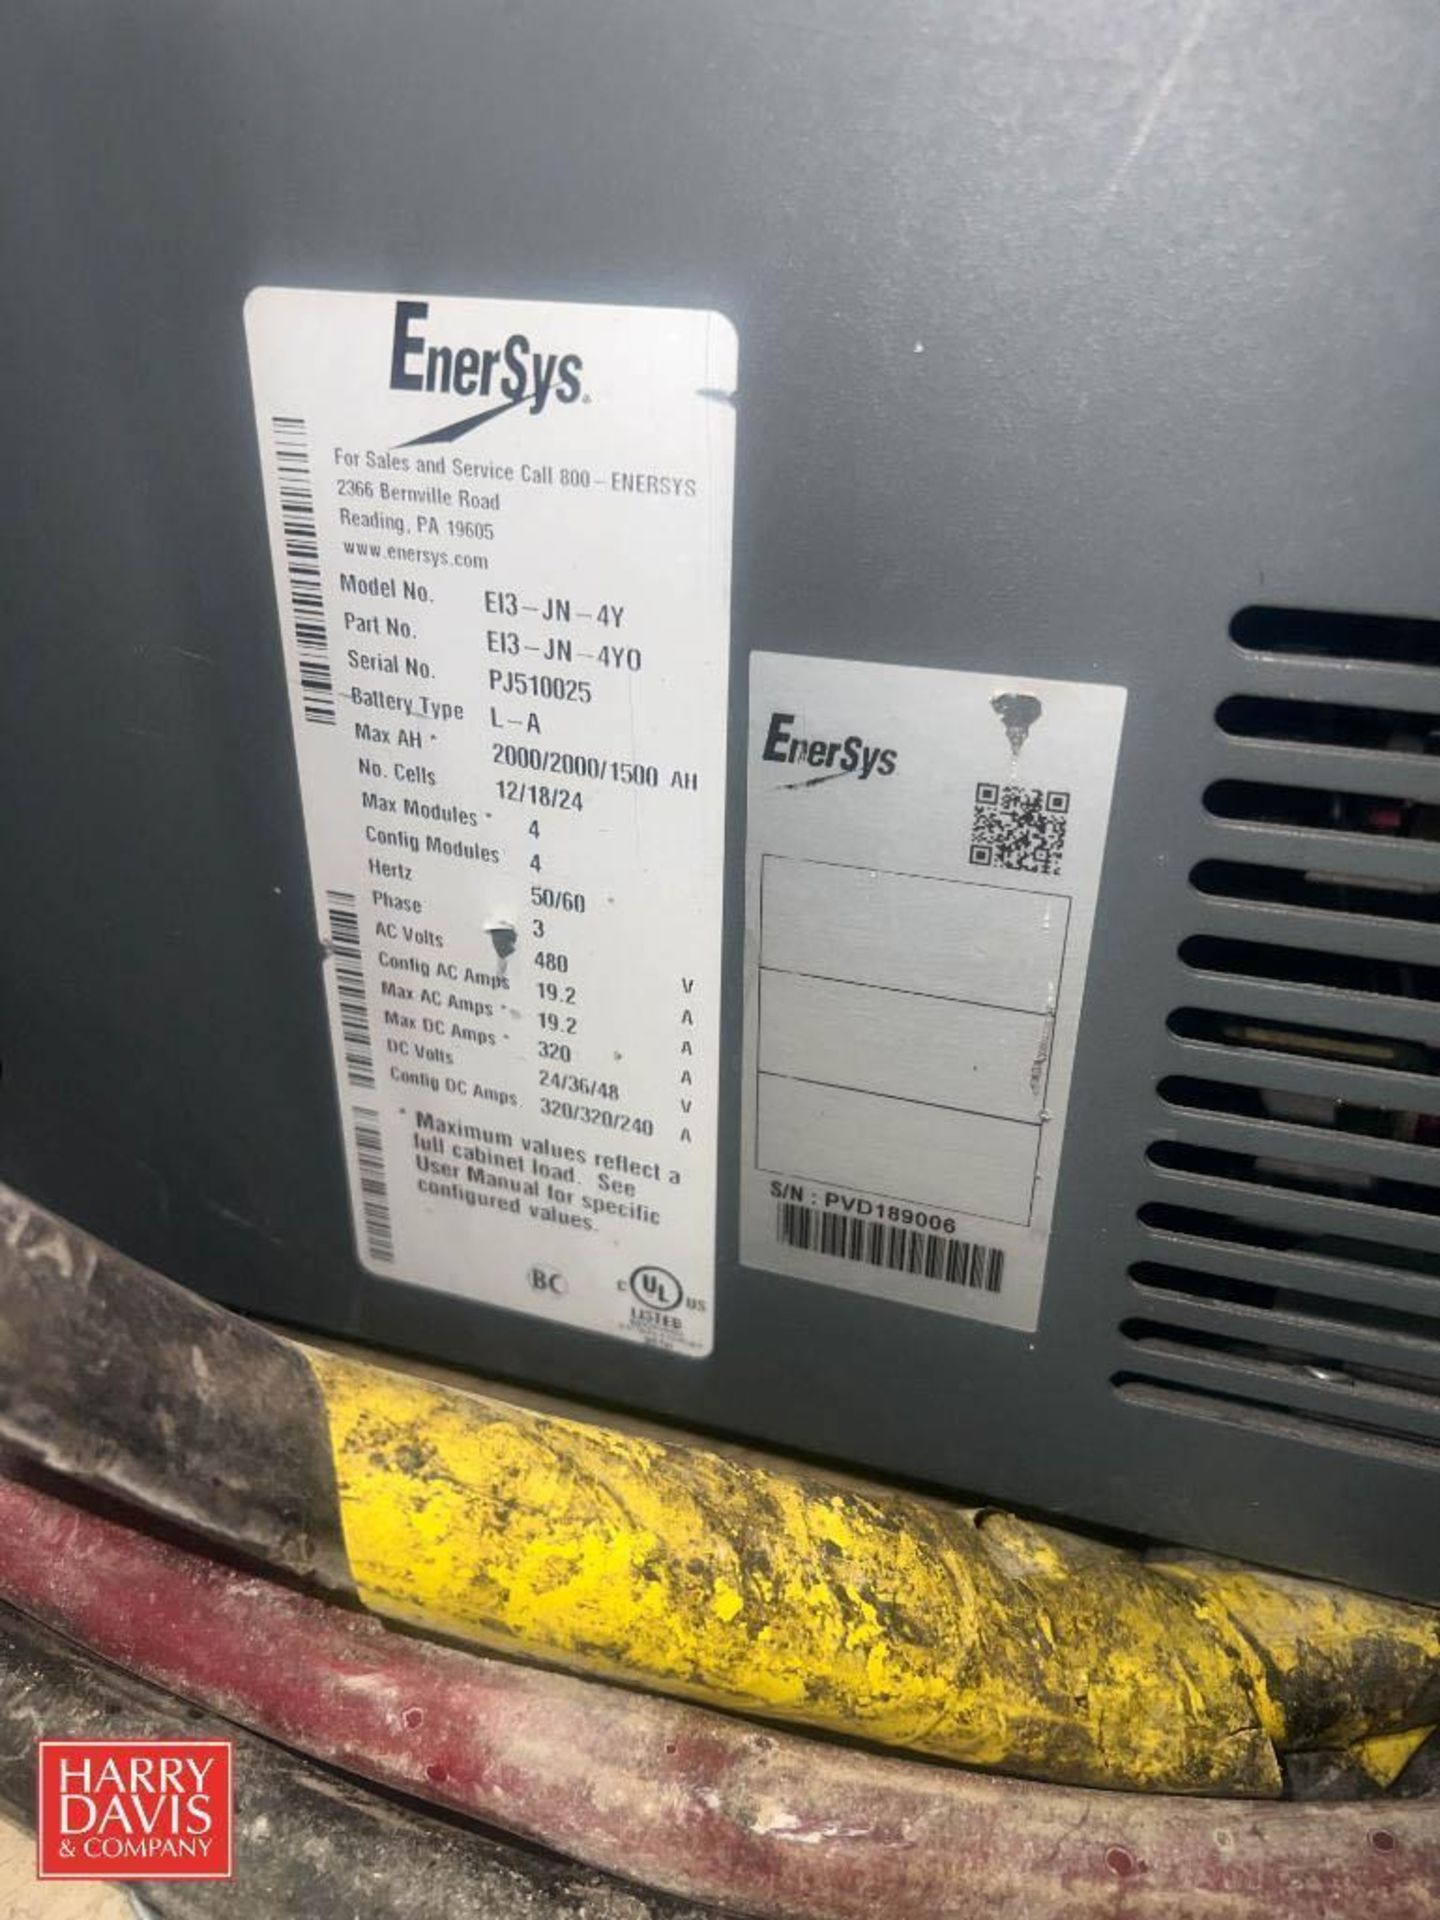 EnerSys 36 Volt Battery Charger (Subject to Seller's Confirmation) - Rigging Fee: $45 - Image 3 of 4